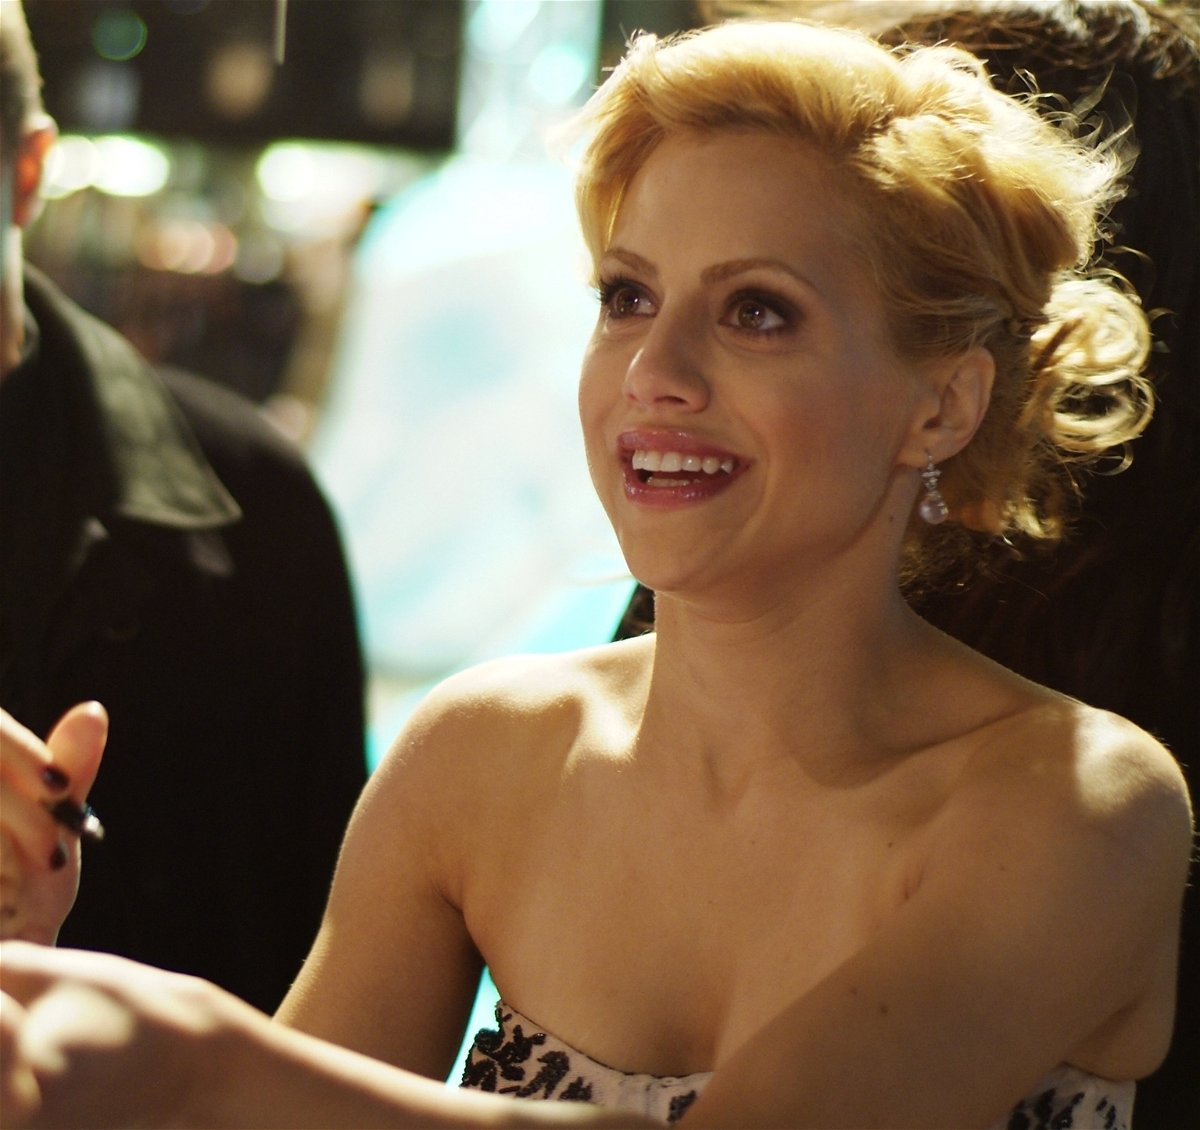 L'attrice Brittany Murphy